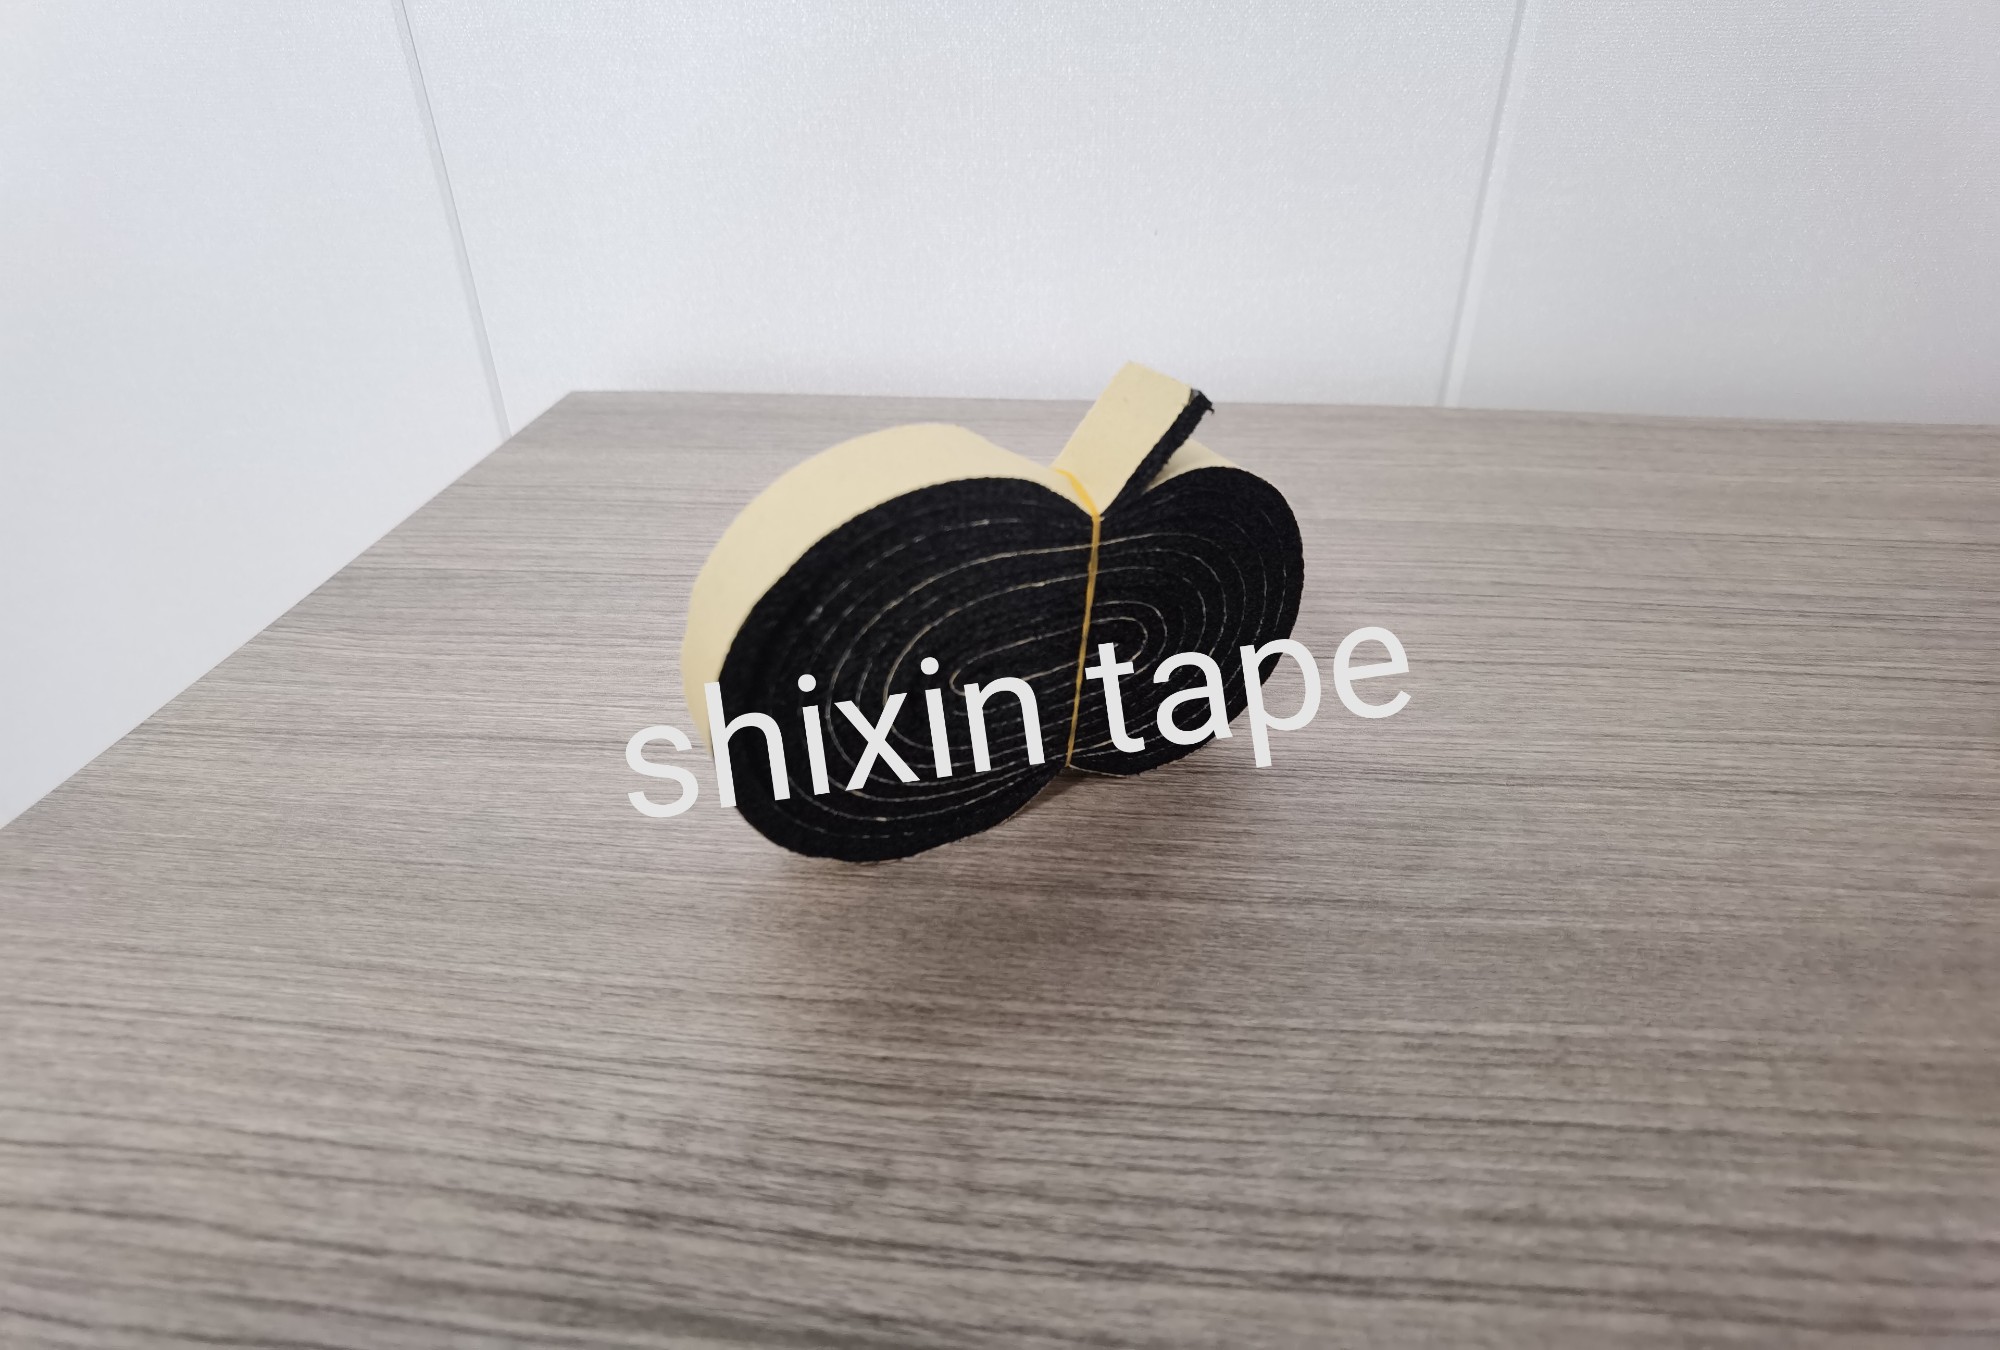 PU foam adhesive tape with liner